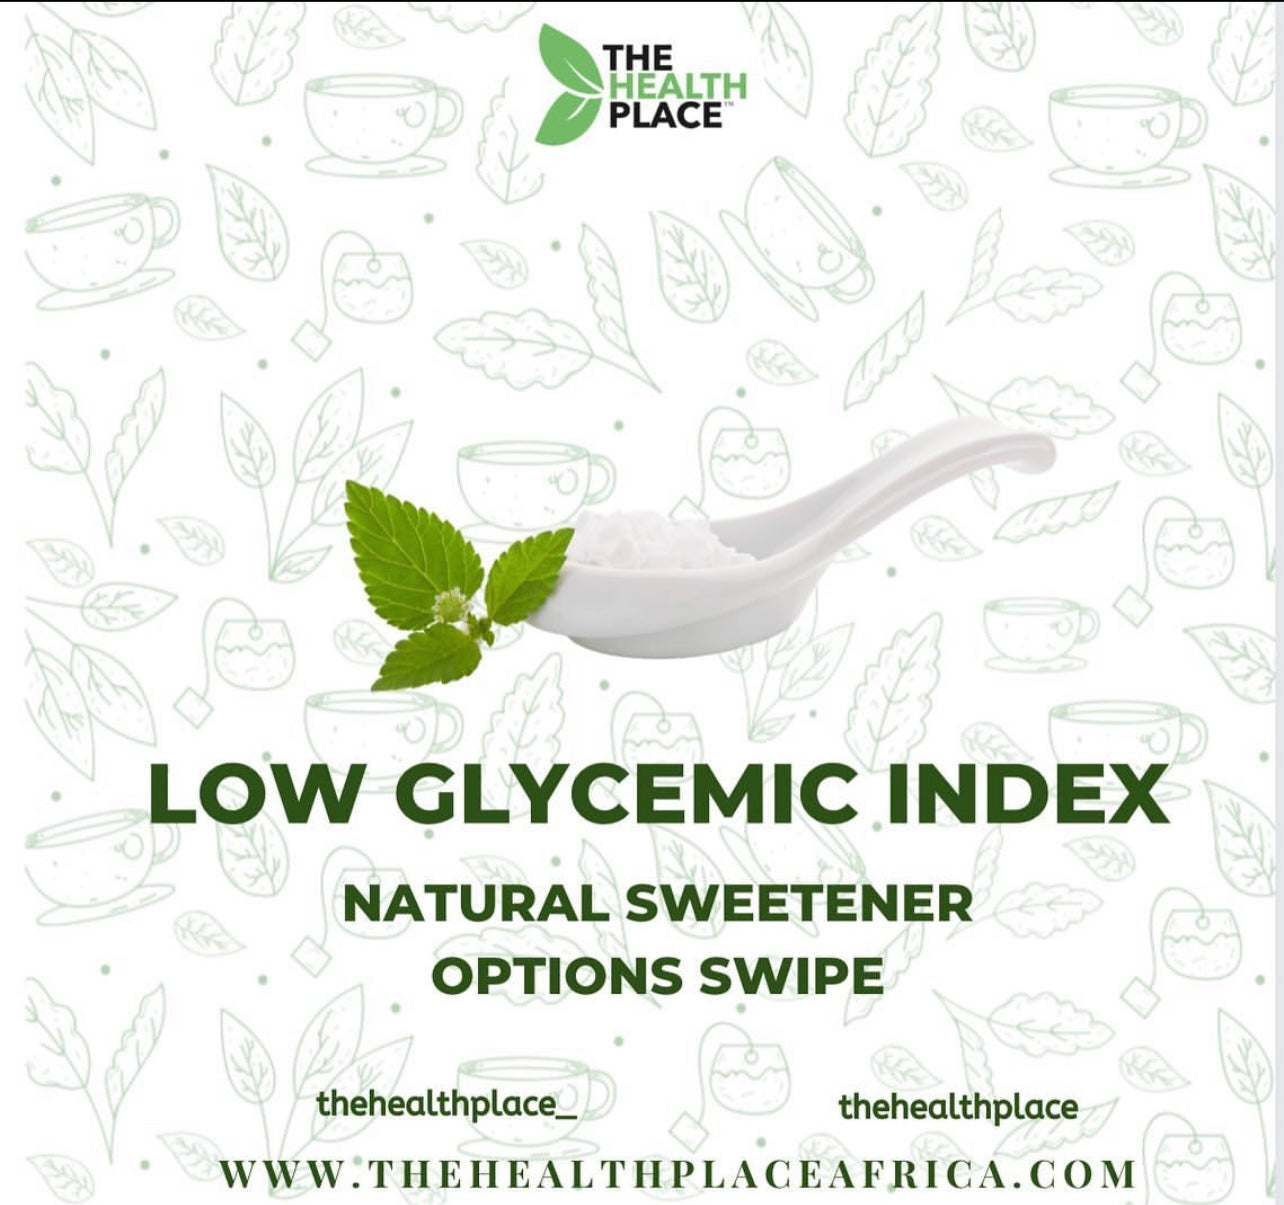 LOW GLYCEMIC INDEX- NATURAL SWEETENER OPTIONS